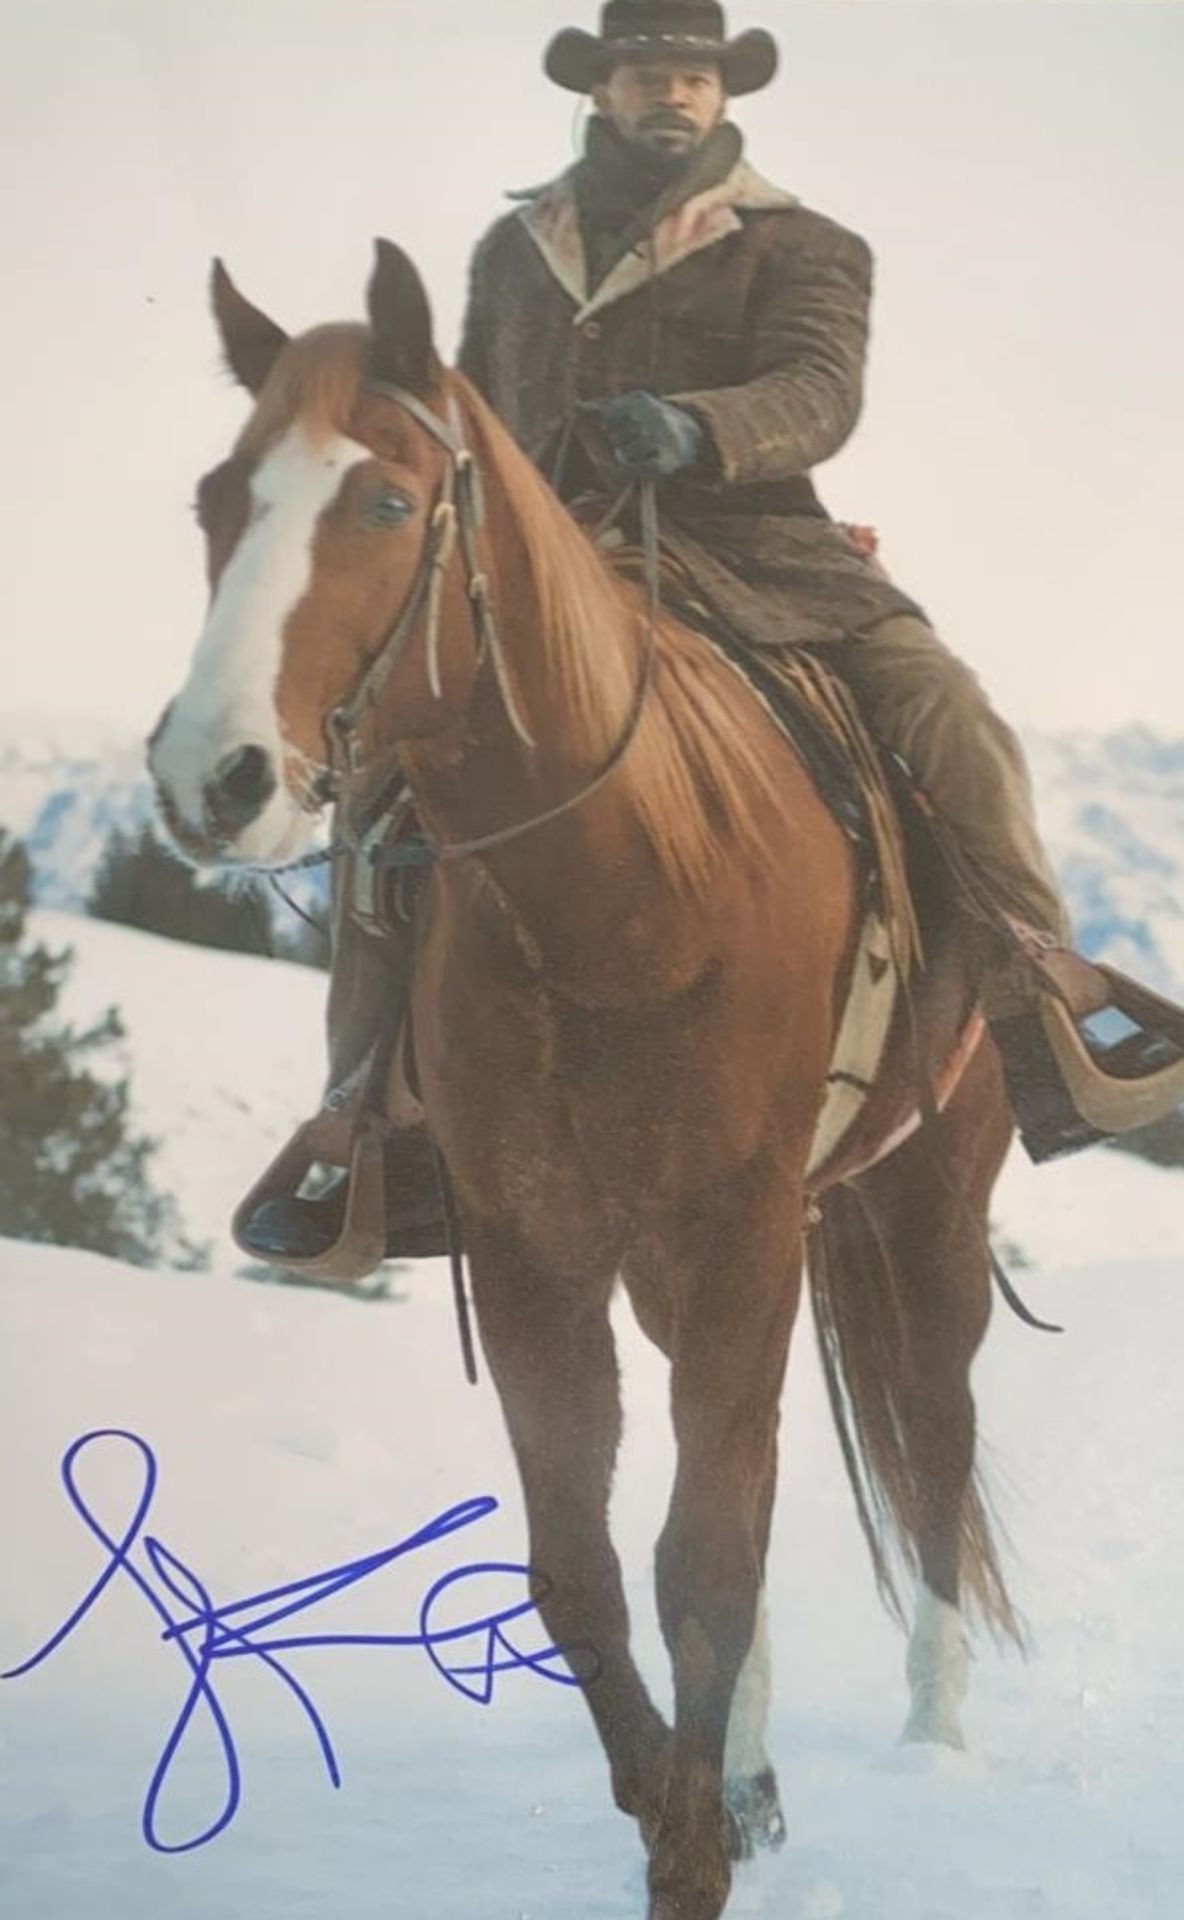 1 x Signed Autograph Picture - DJANGO UNCHAINED JAMIE FOXX - With COA - Size 12 x 8 Inch - NO VAT ON